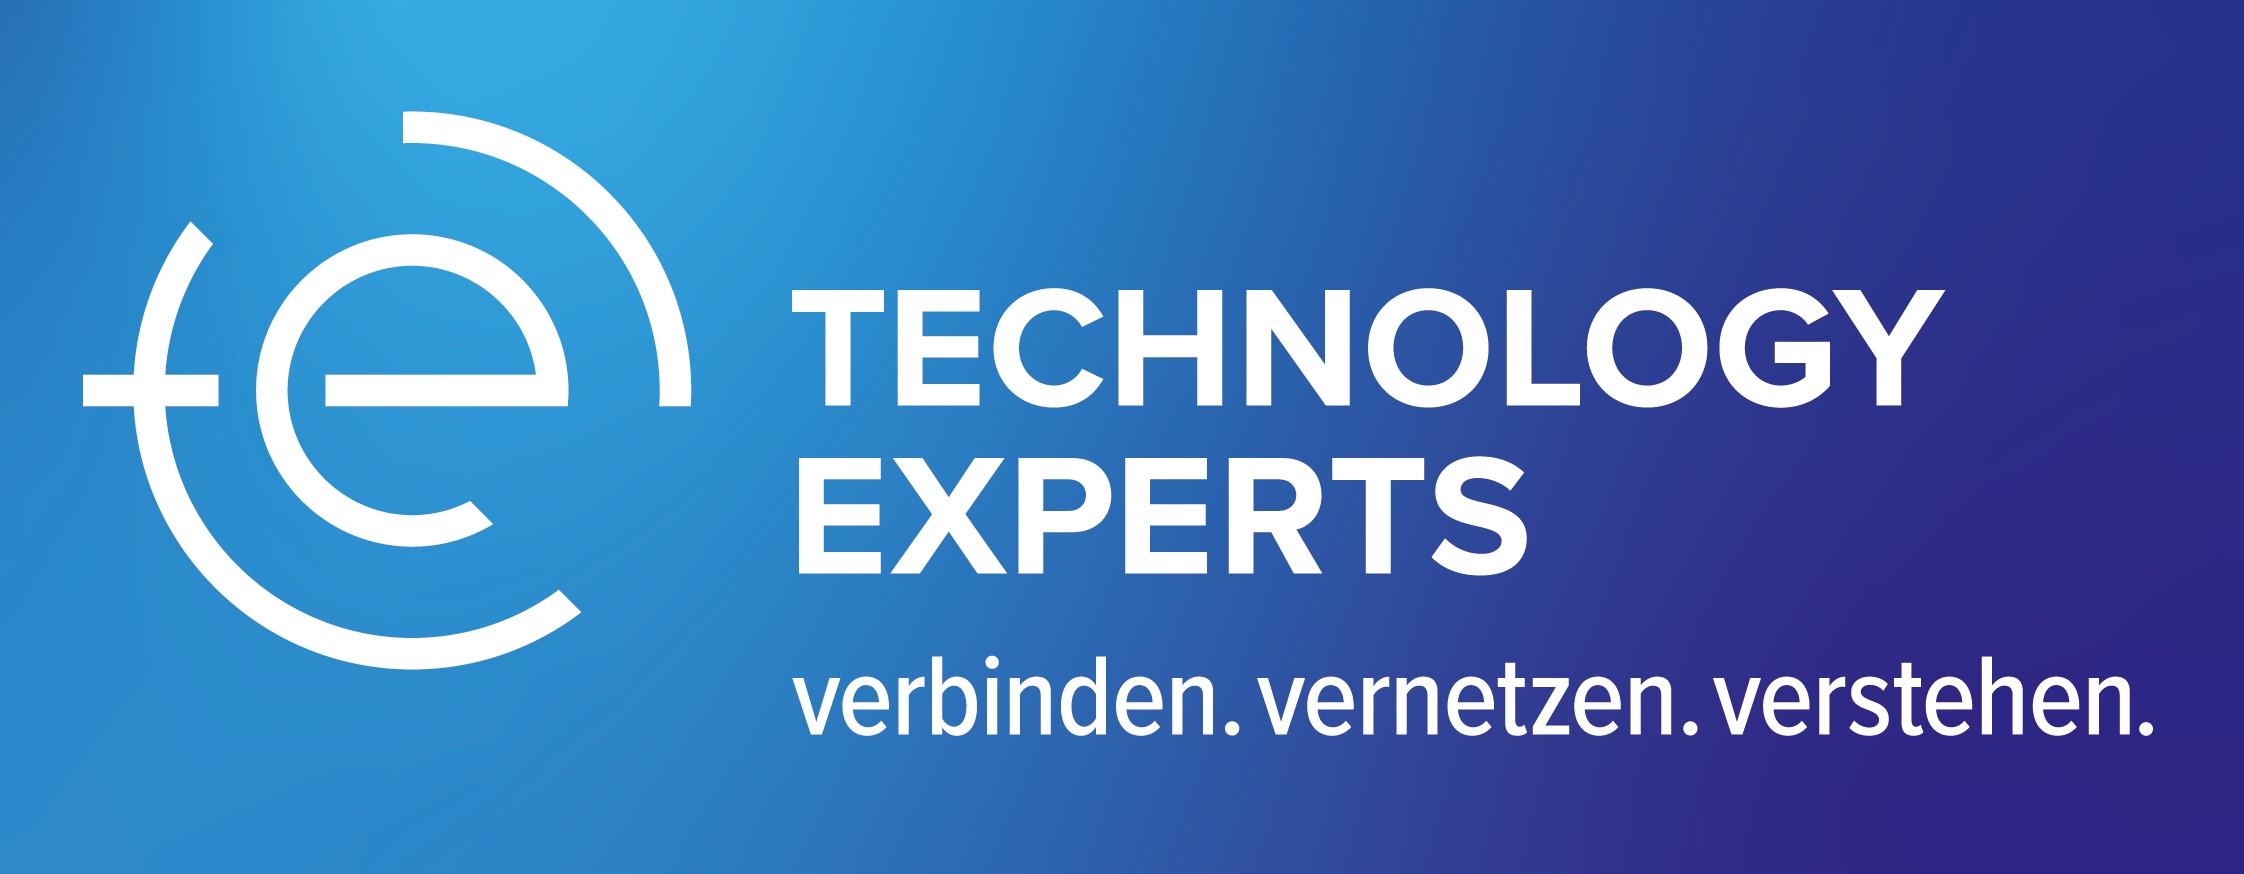 technology experts GmbH & Co. KG